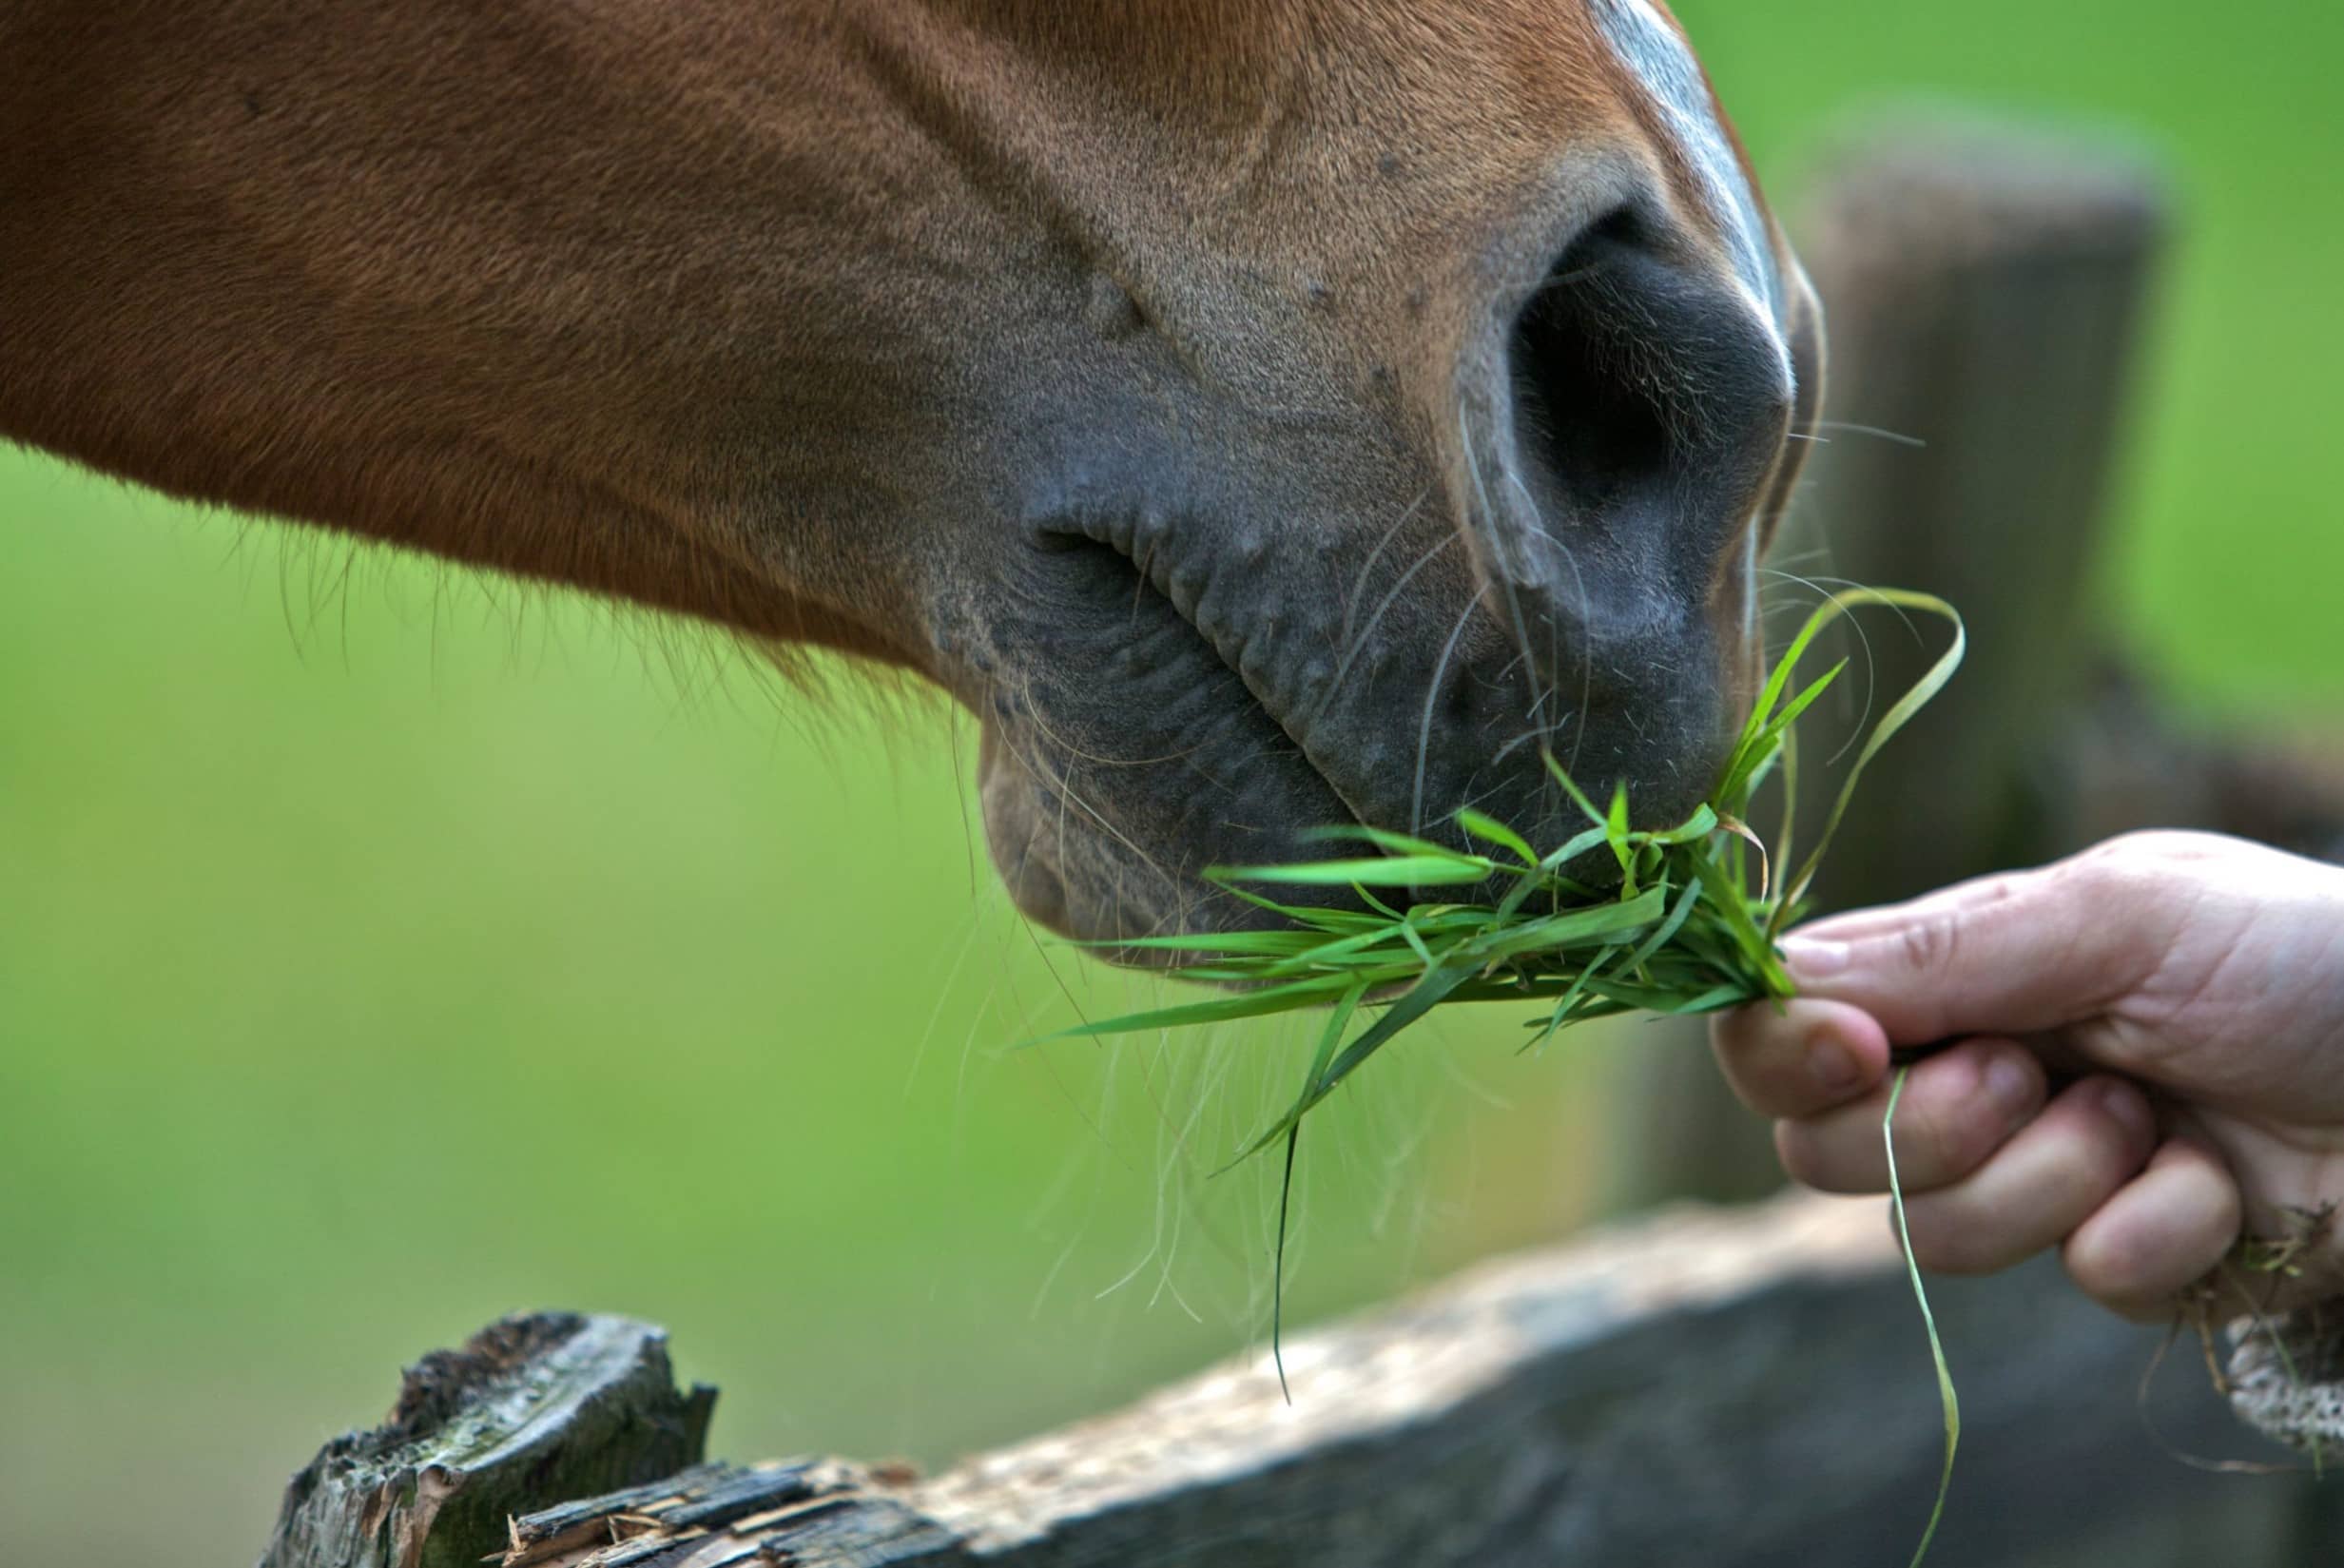 Why Can’t Horses Eat Grass Clippings